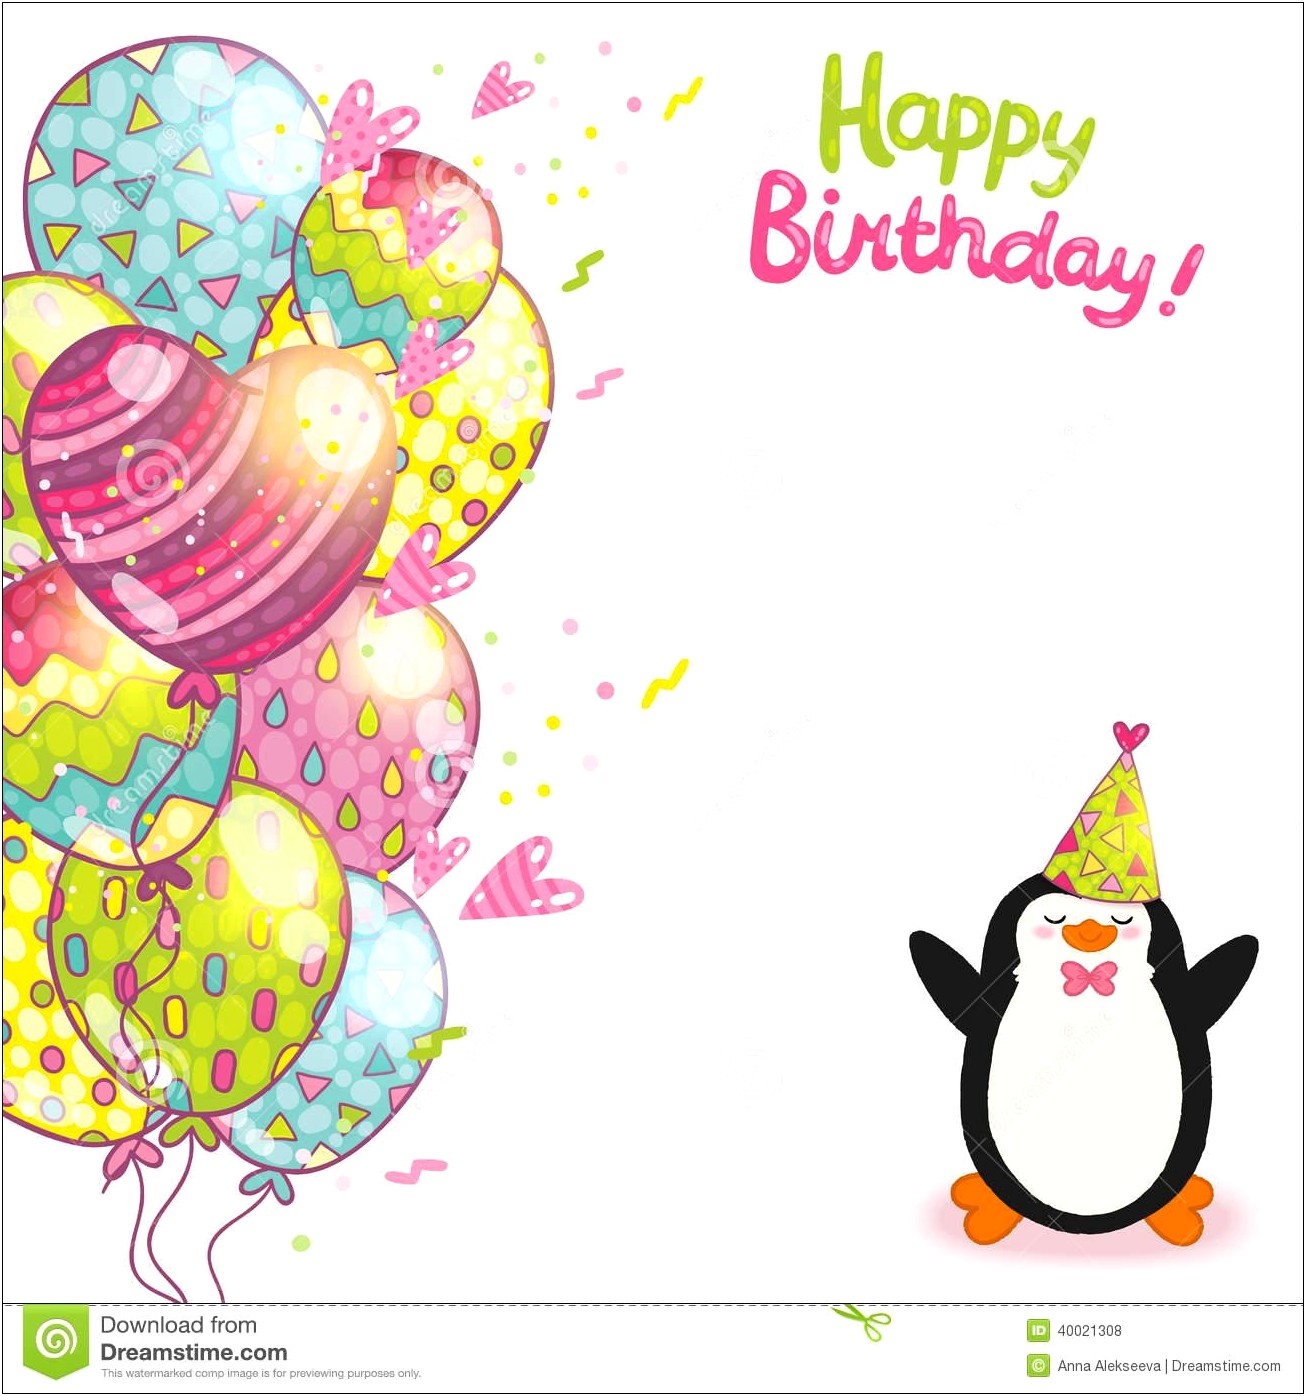 Free Birthday Card Templates For Word 2010